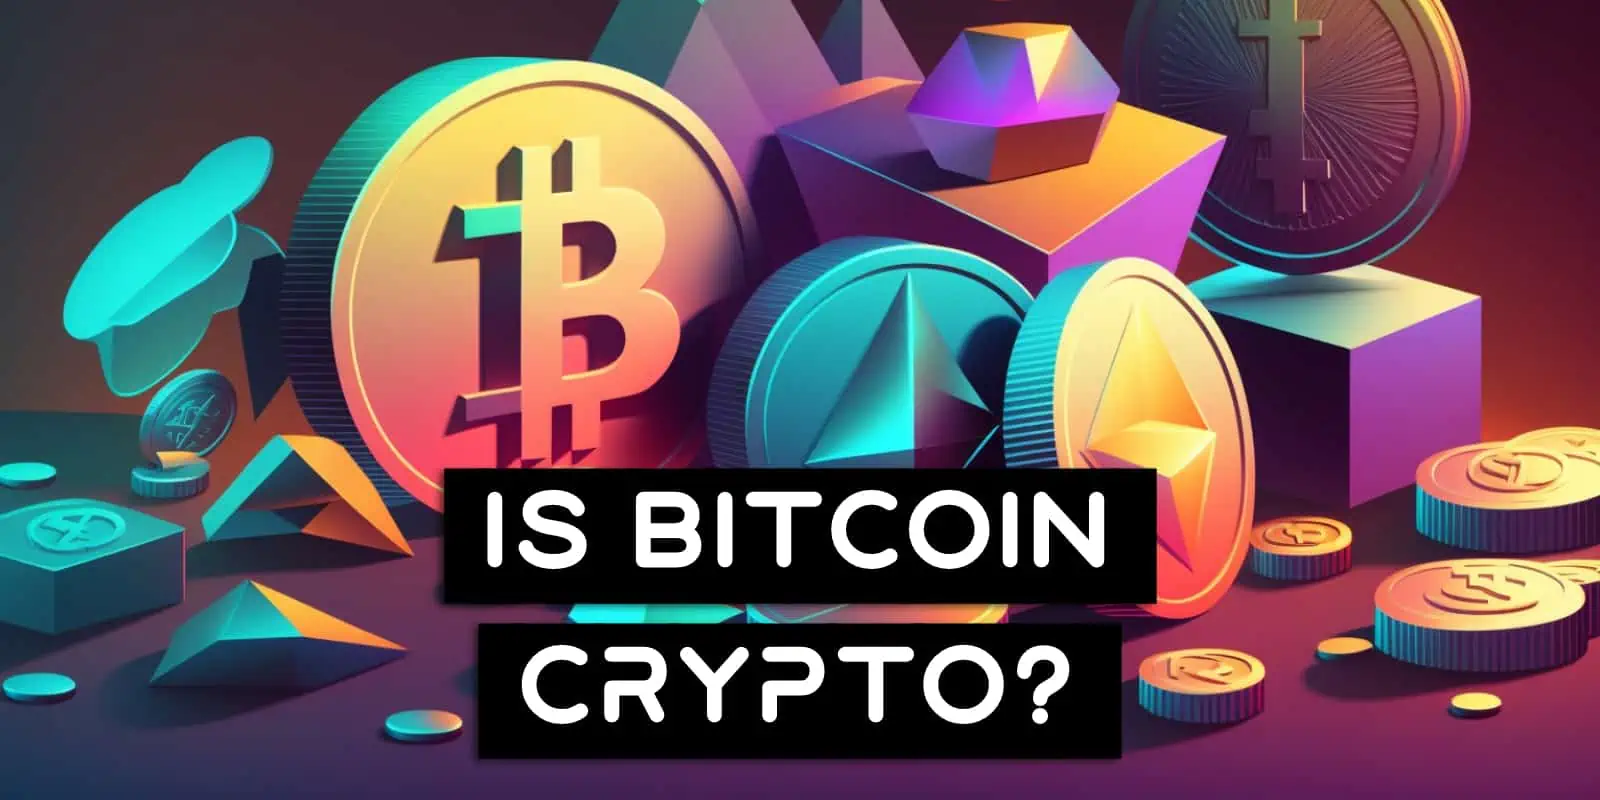 Is Bitcoin Cryptocurrency